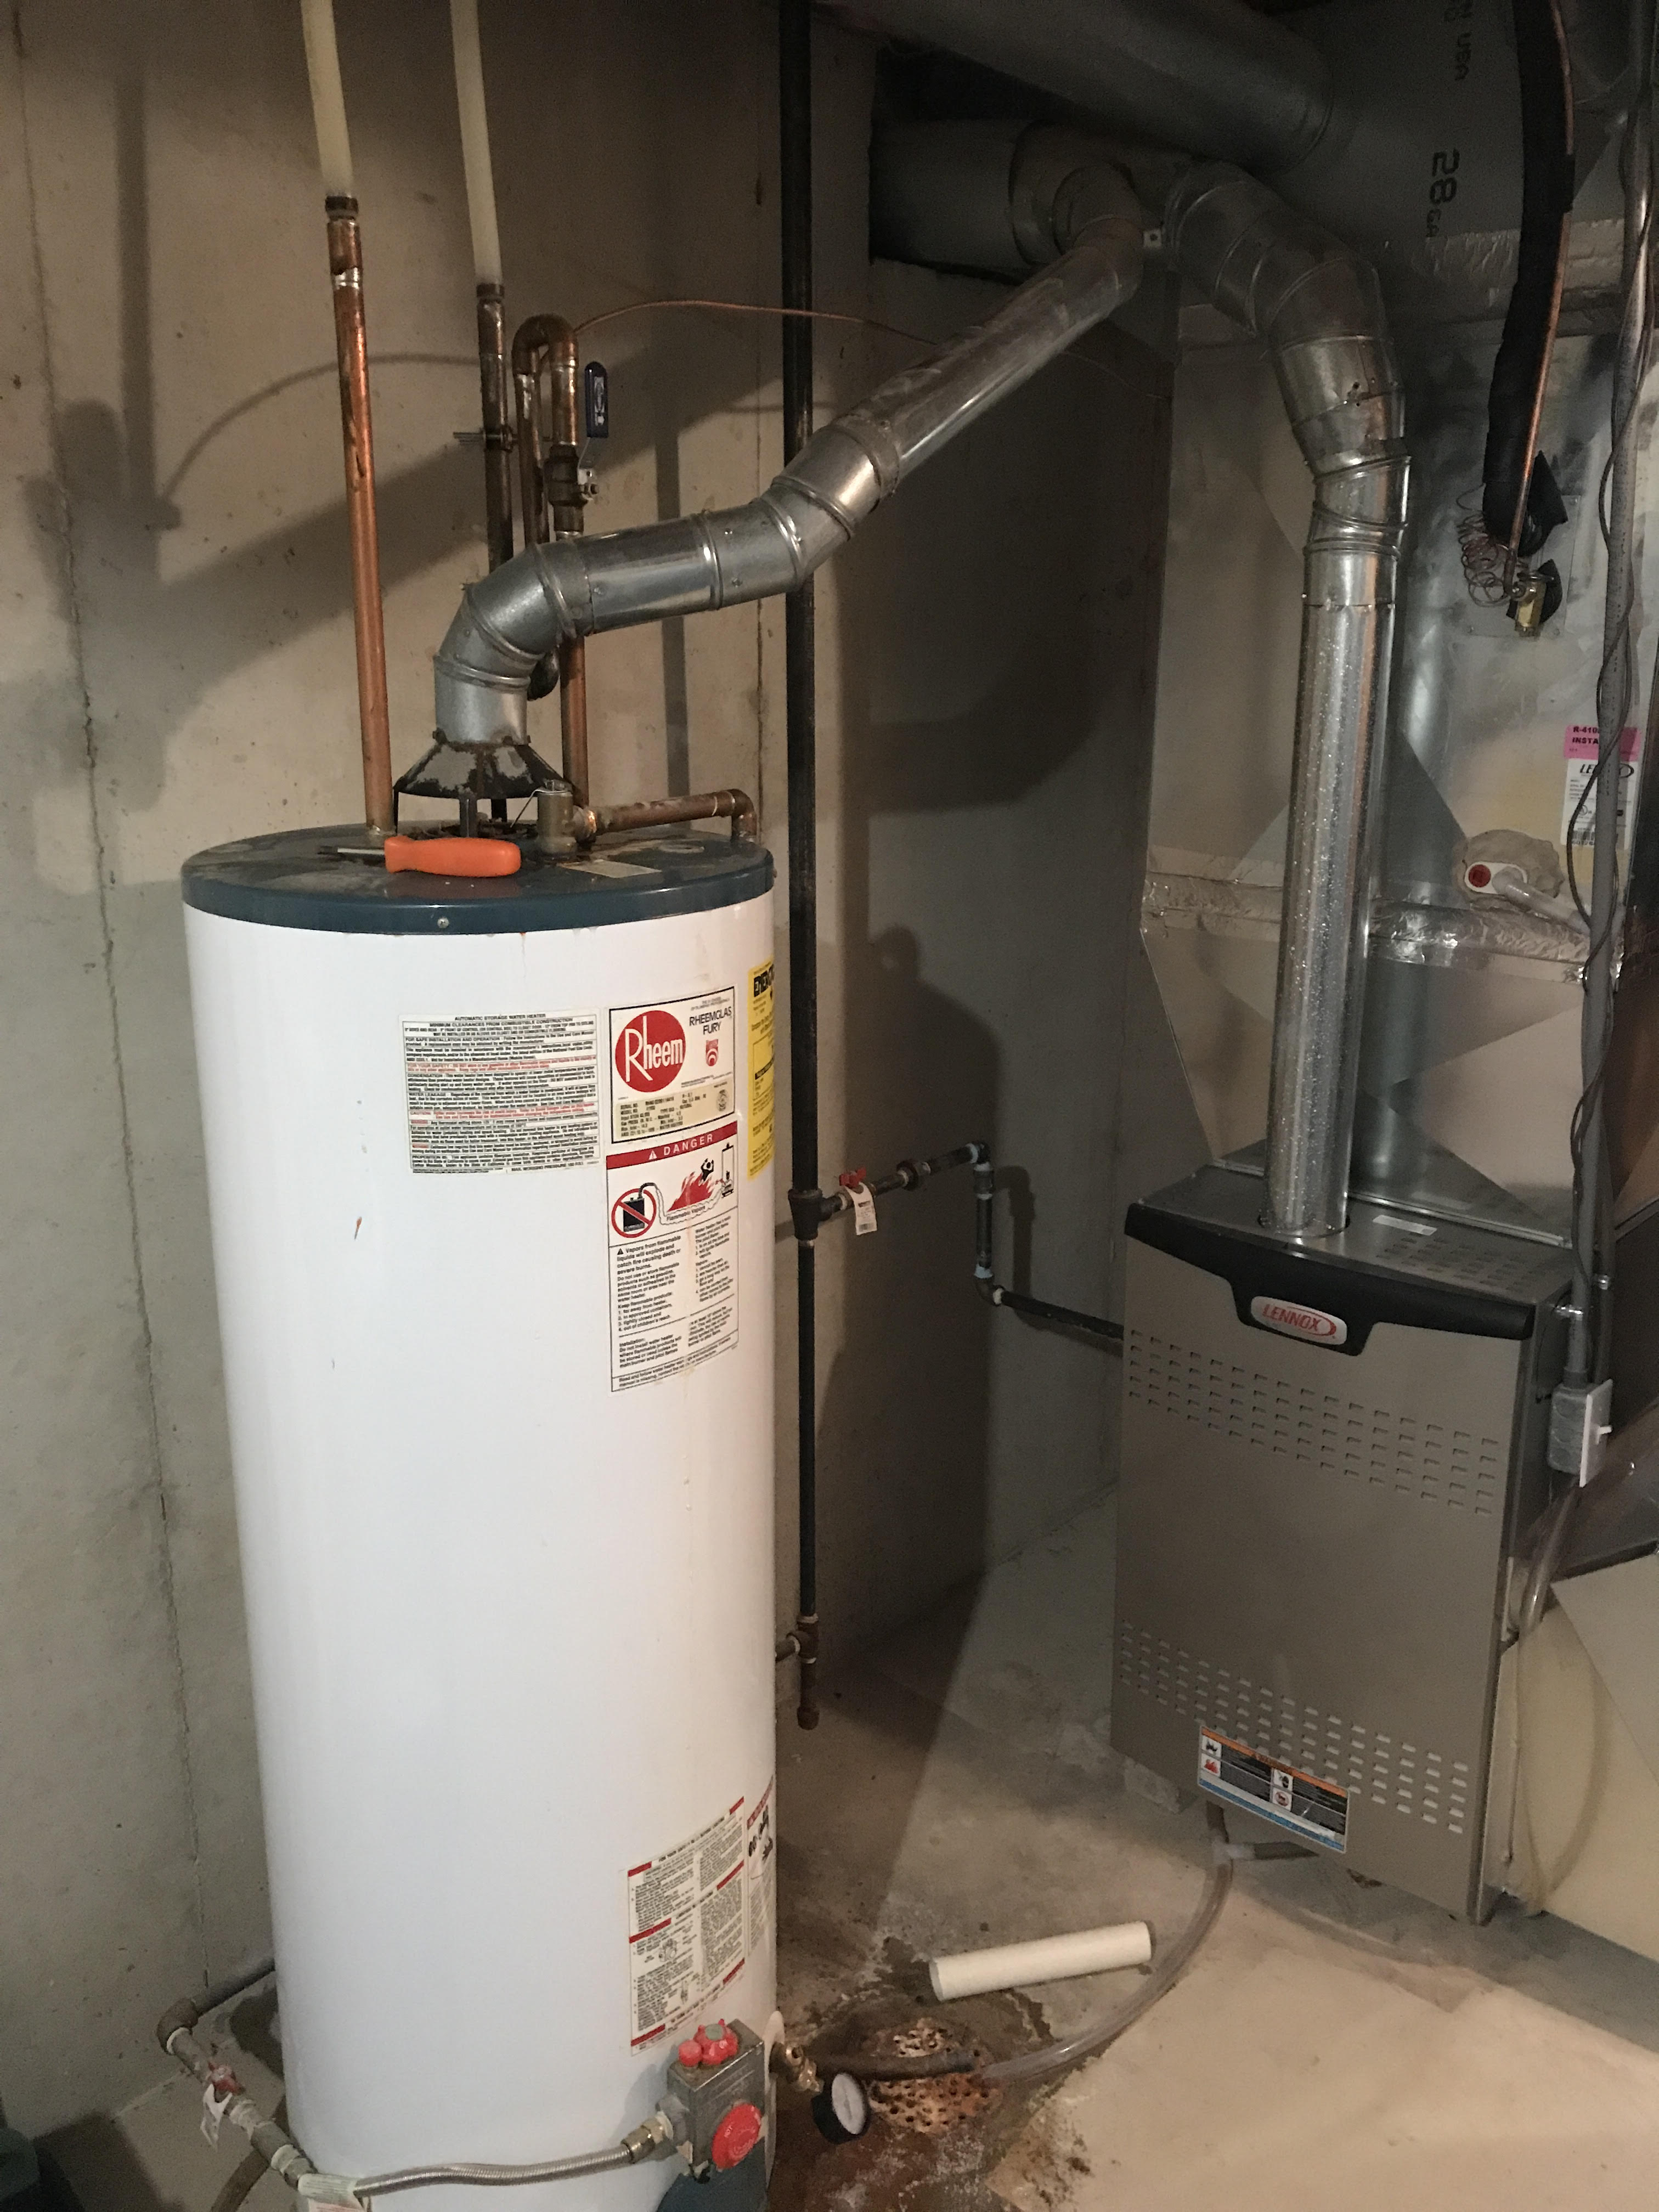 Incorrectly vented water heater